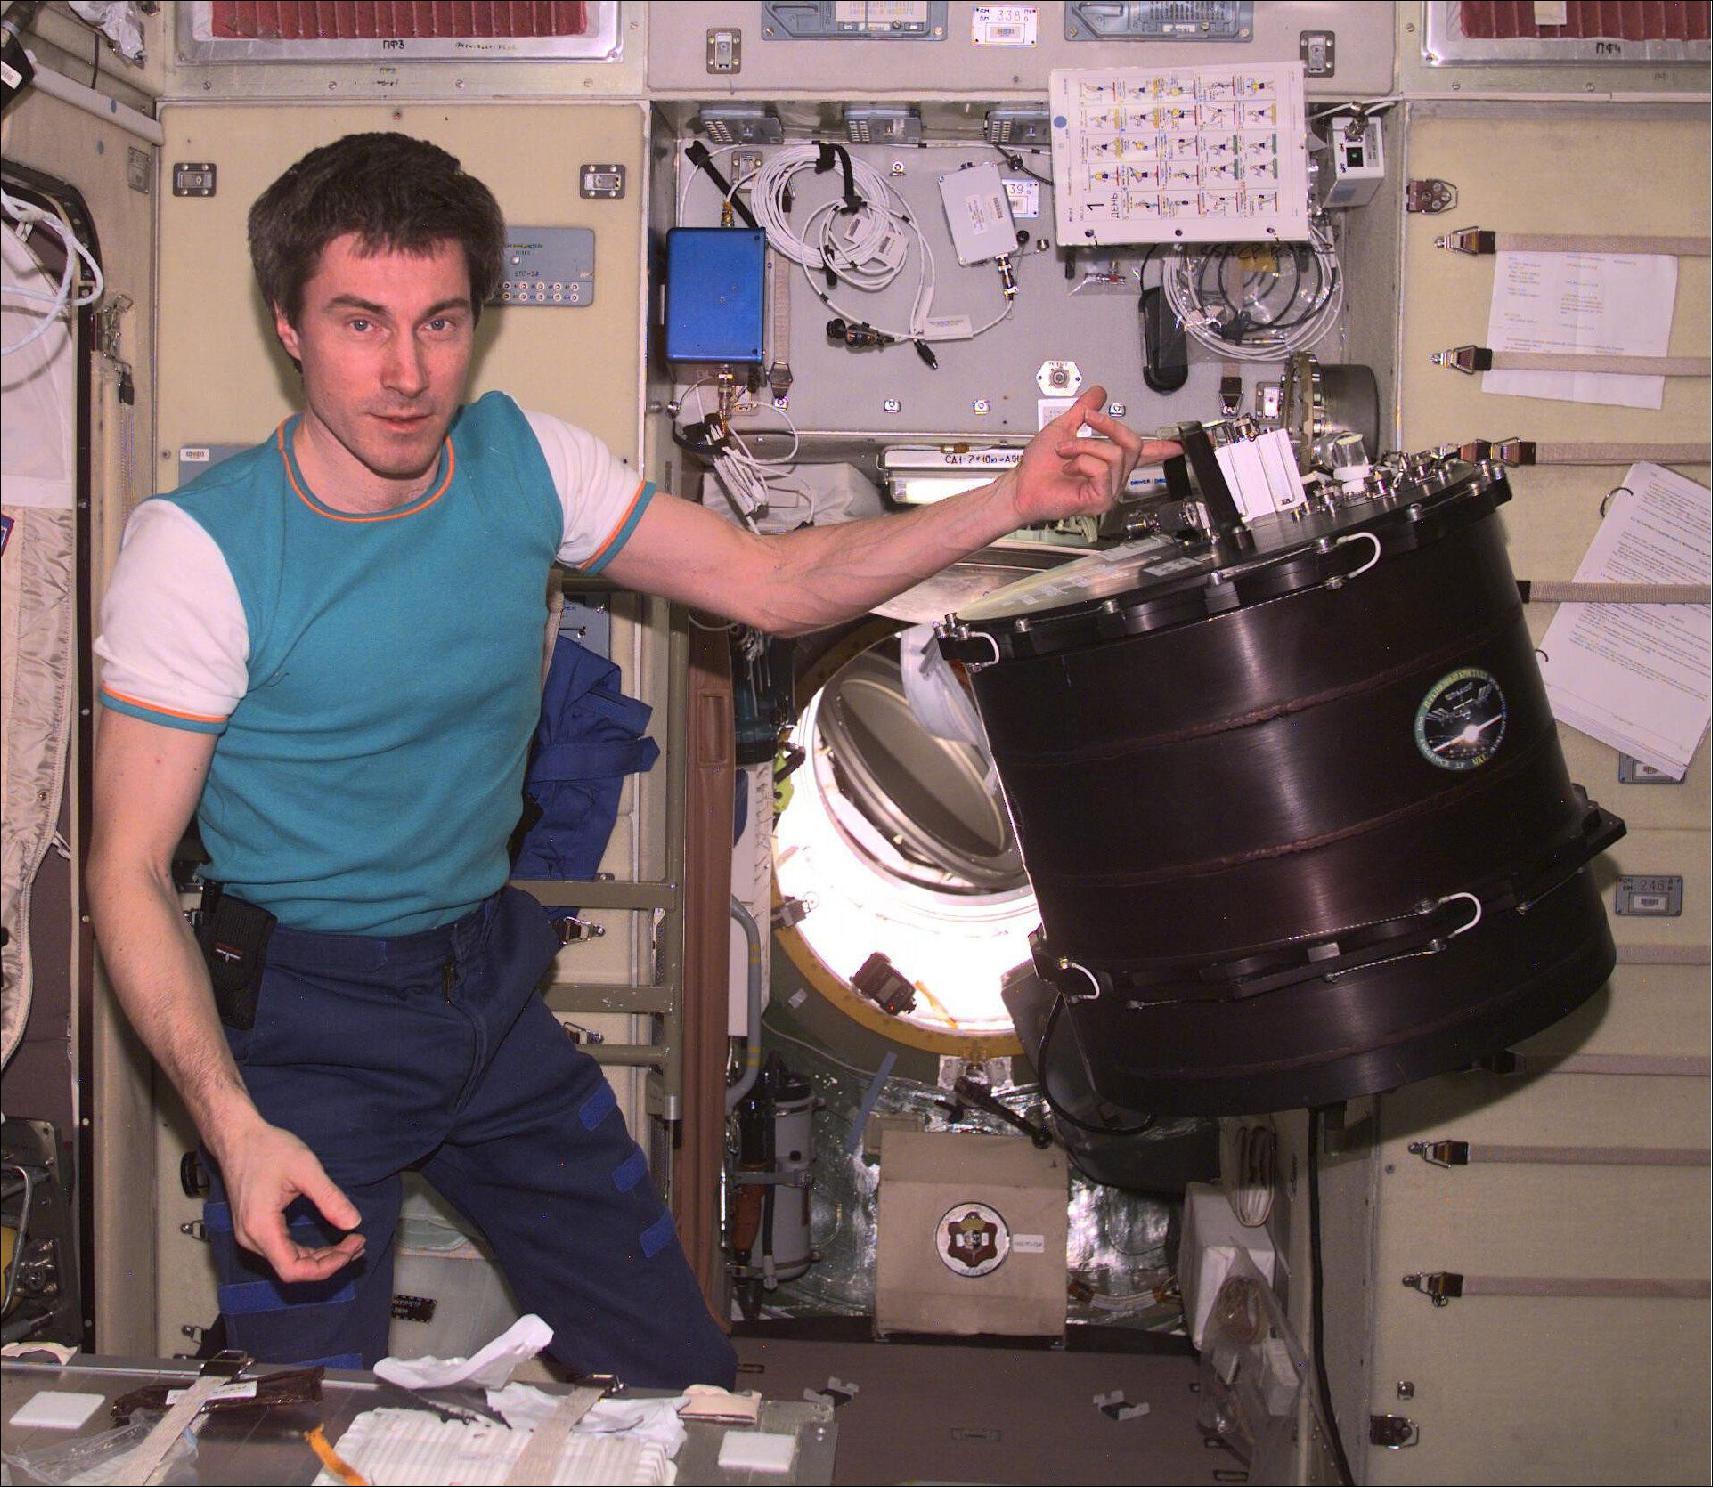 Figure 4: Sergei Krikalev with the PKE-Nefedov experiment (PK-3) during Expedition 1 mission on the ISS in 2001 (image credit: RSC Energia)